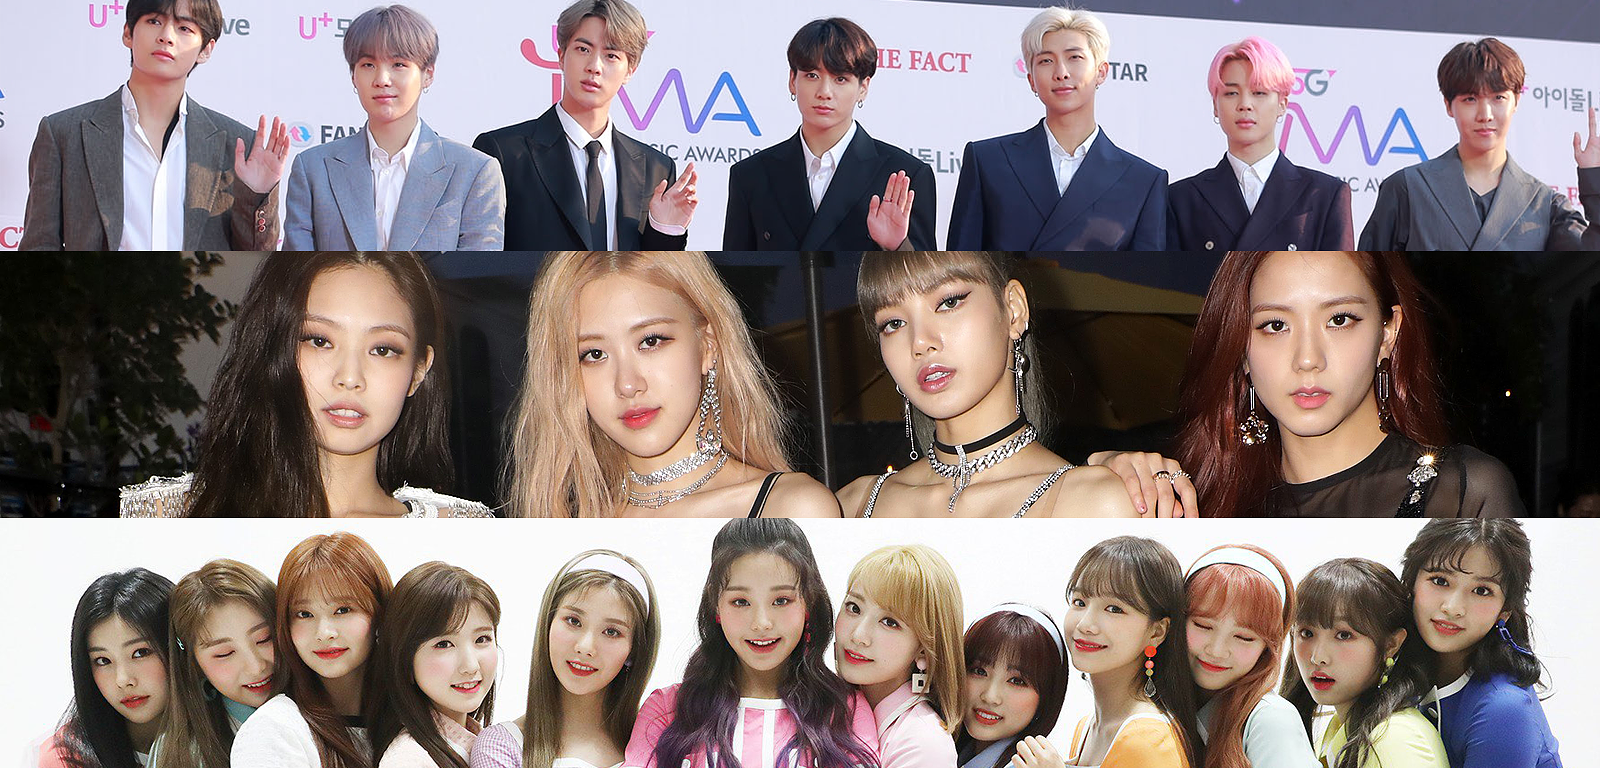 Check out the reputation rankings of April's K-Pop bands